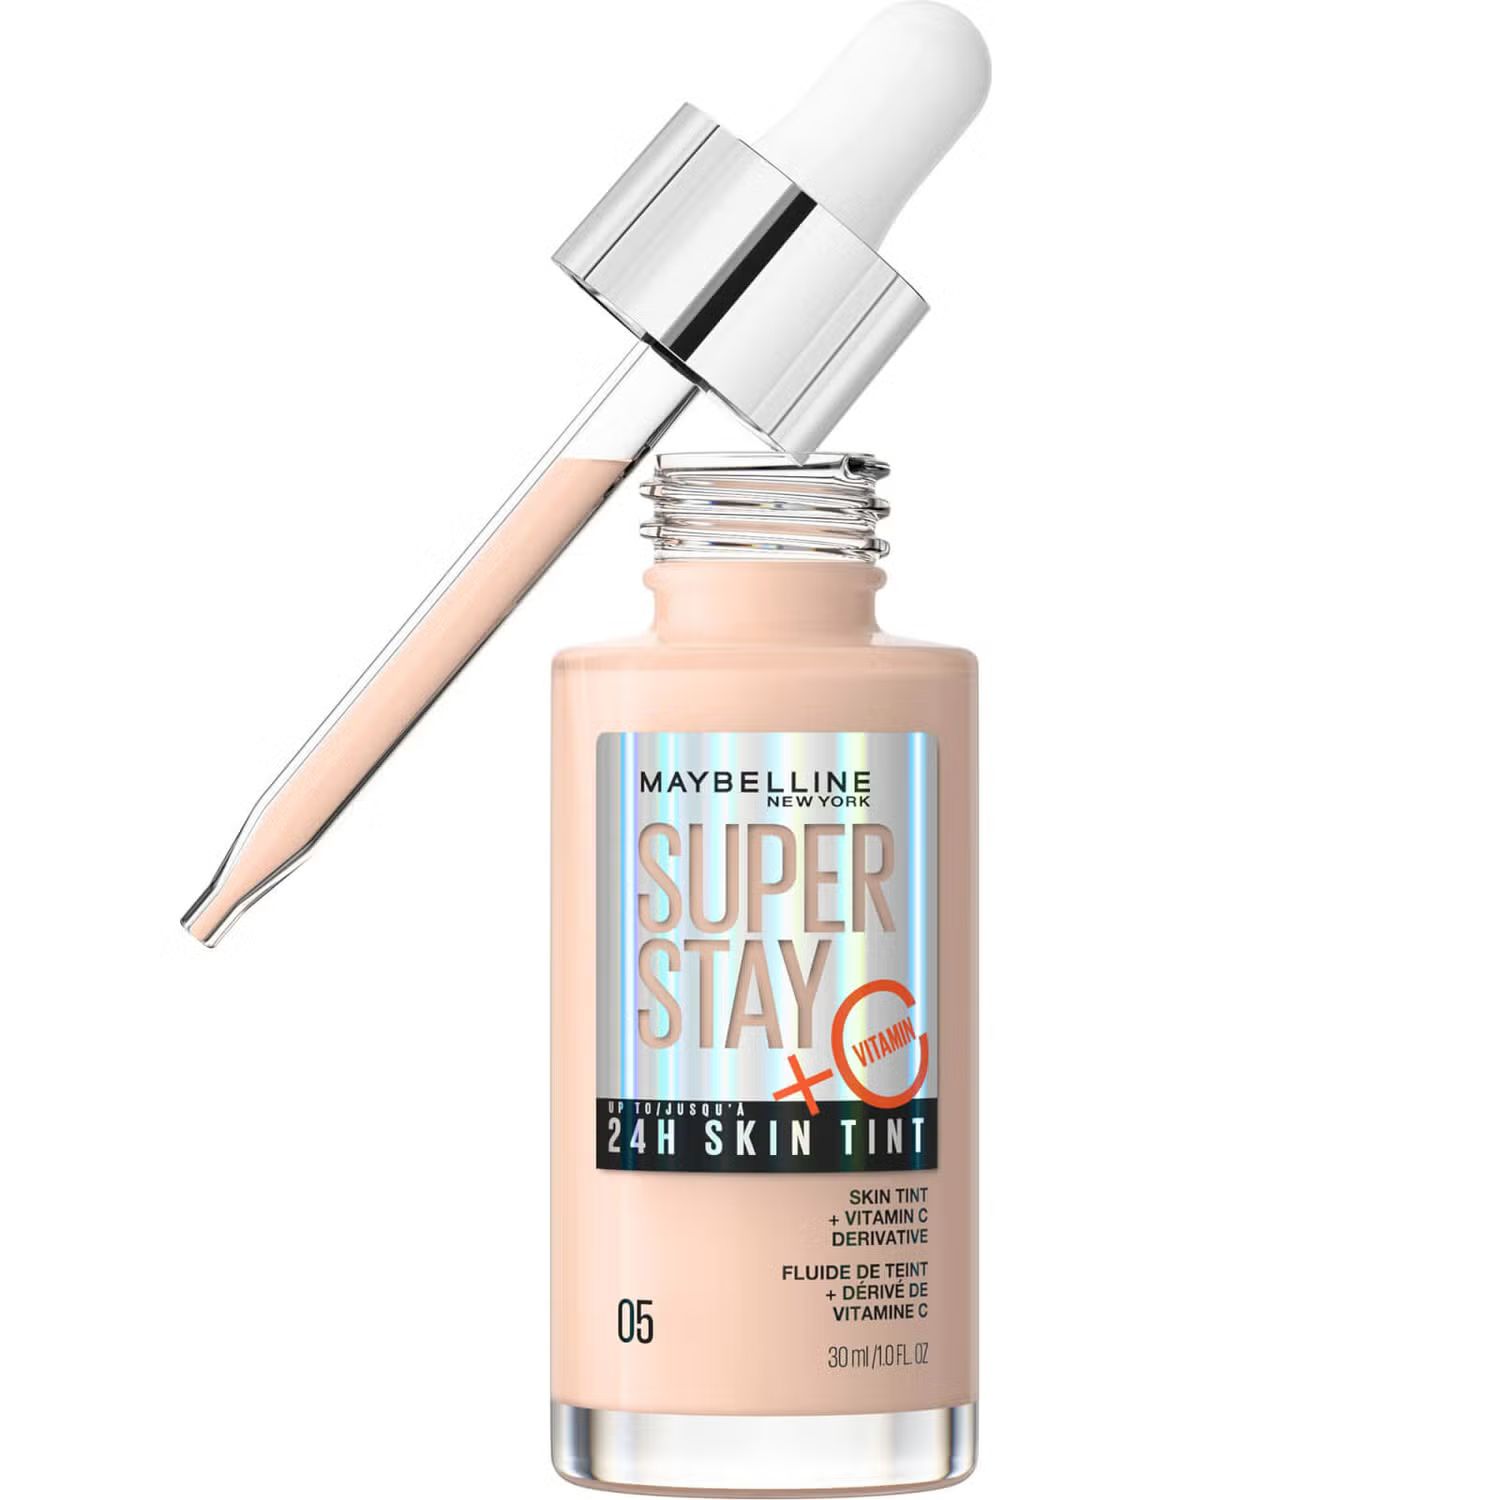 Maybelline Super Stay up to 24H Skin Tint Foundation + Vitamin C 30ml (Various Shades) | Look Fantastic (UK)